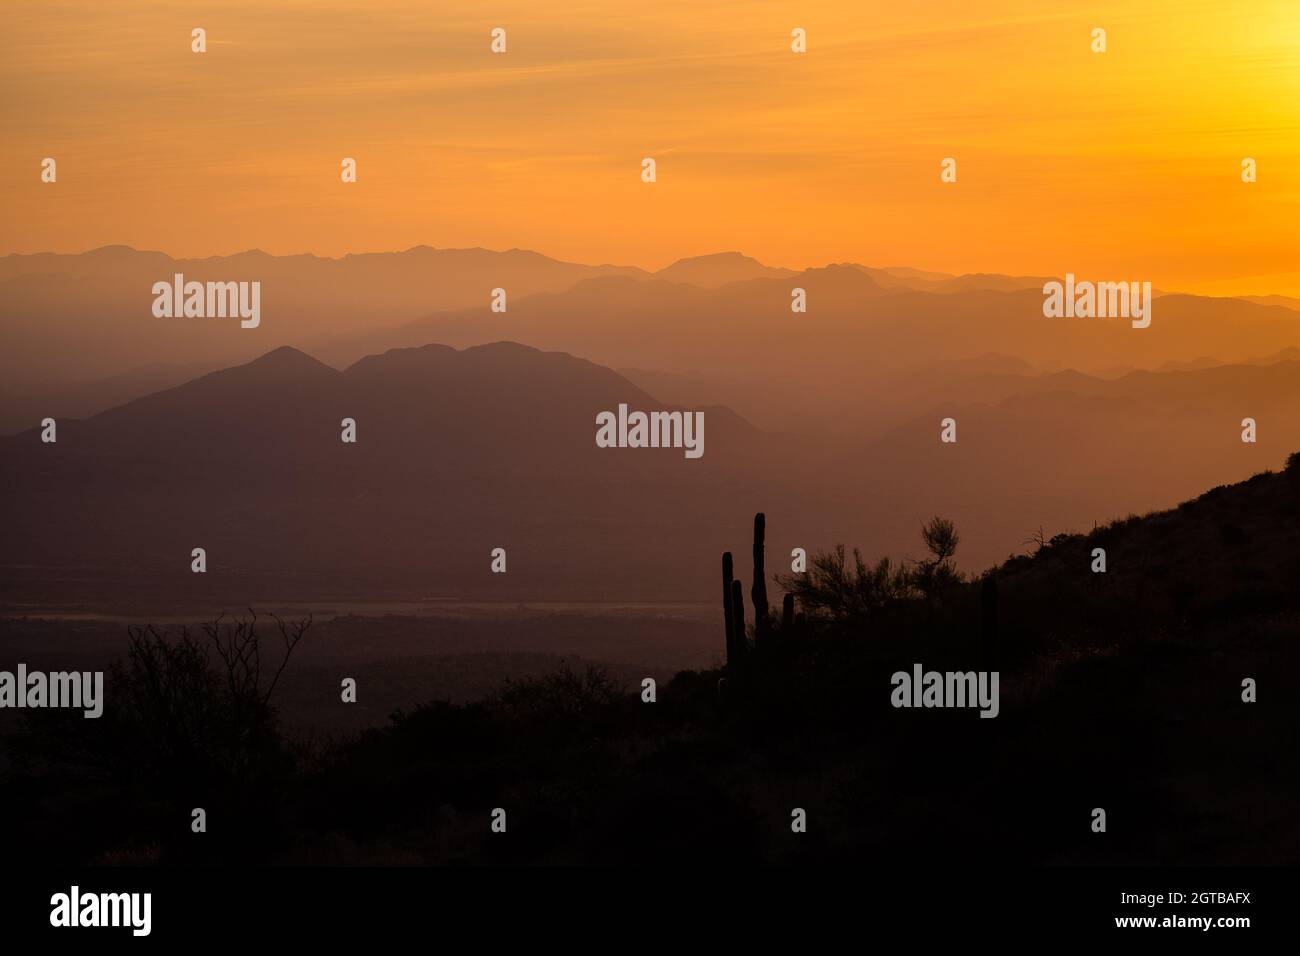 Scenic View Of Silhouette Mountains Against Orange Sky During Sunrise Stock Photo